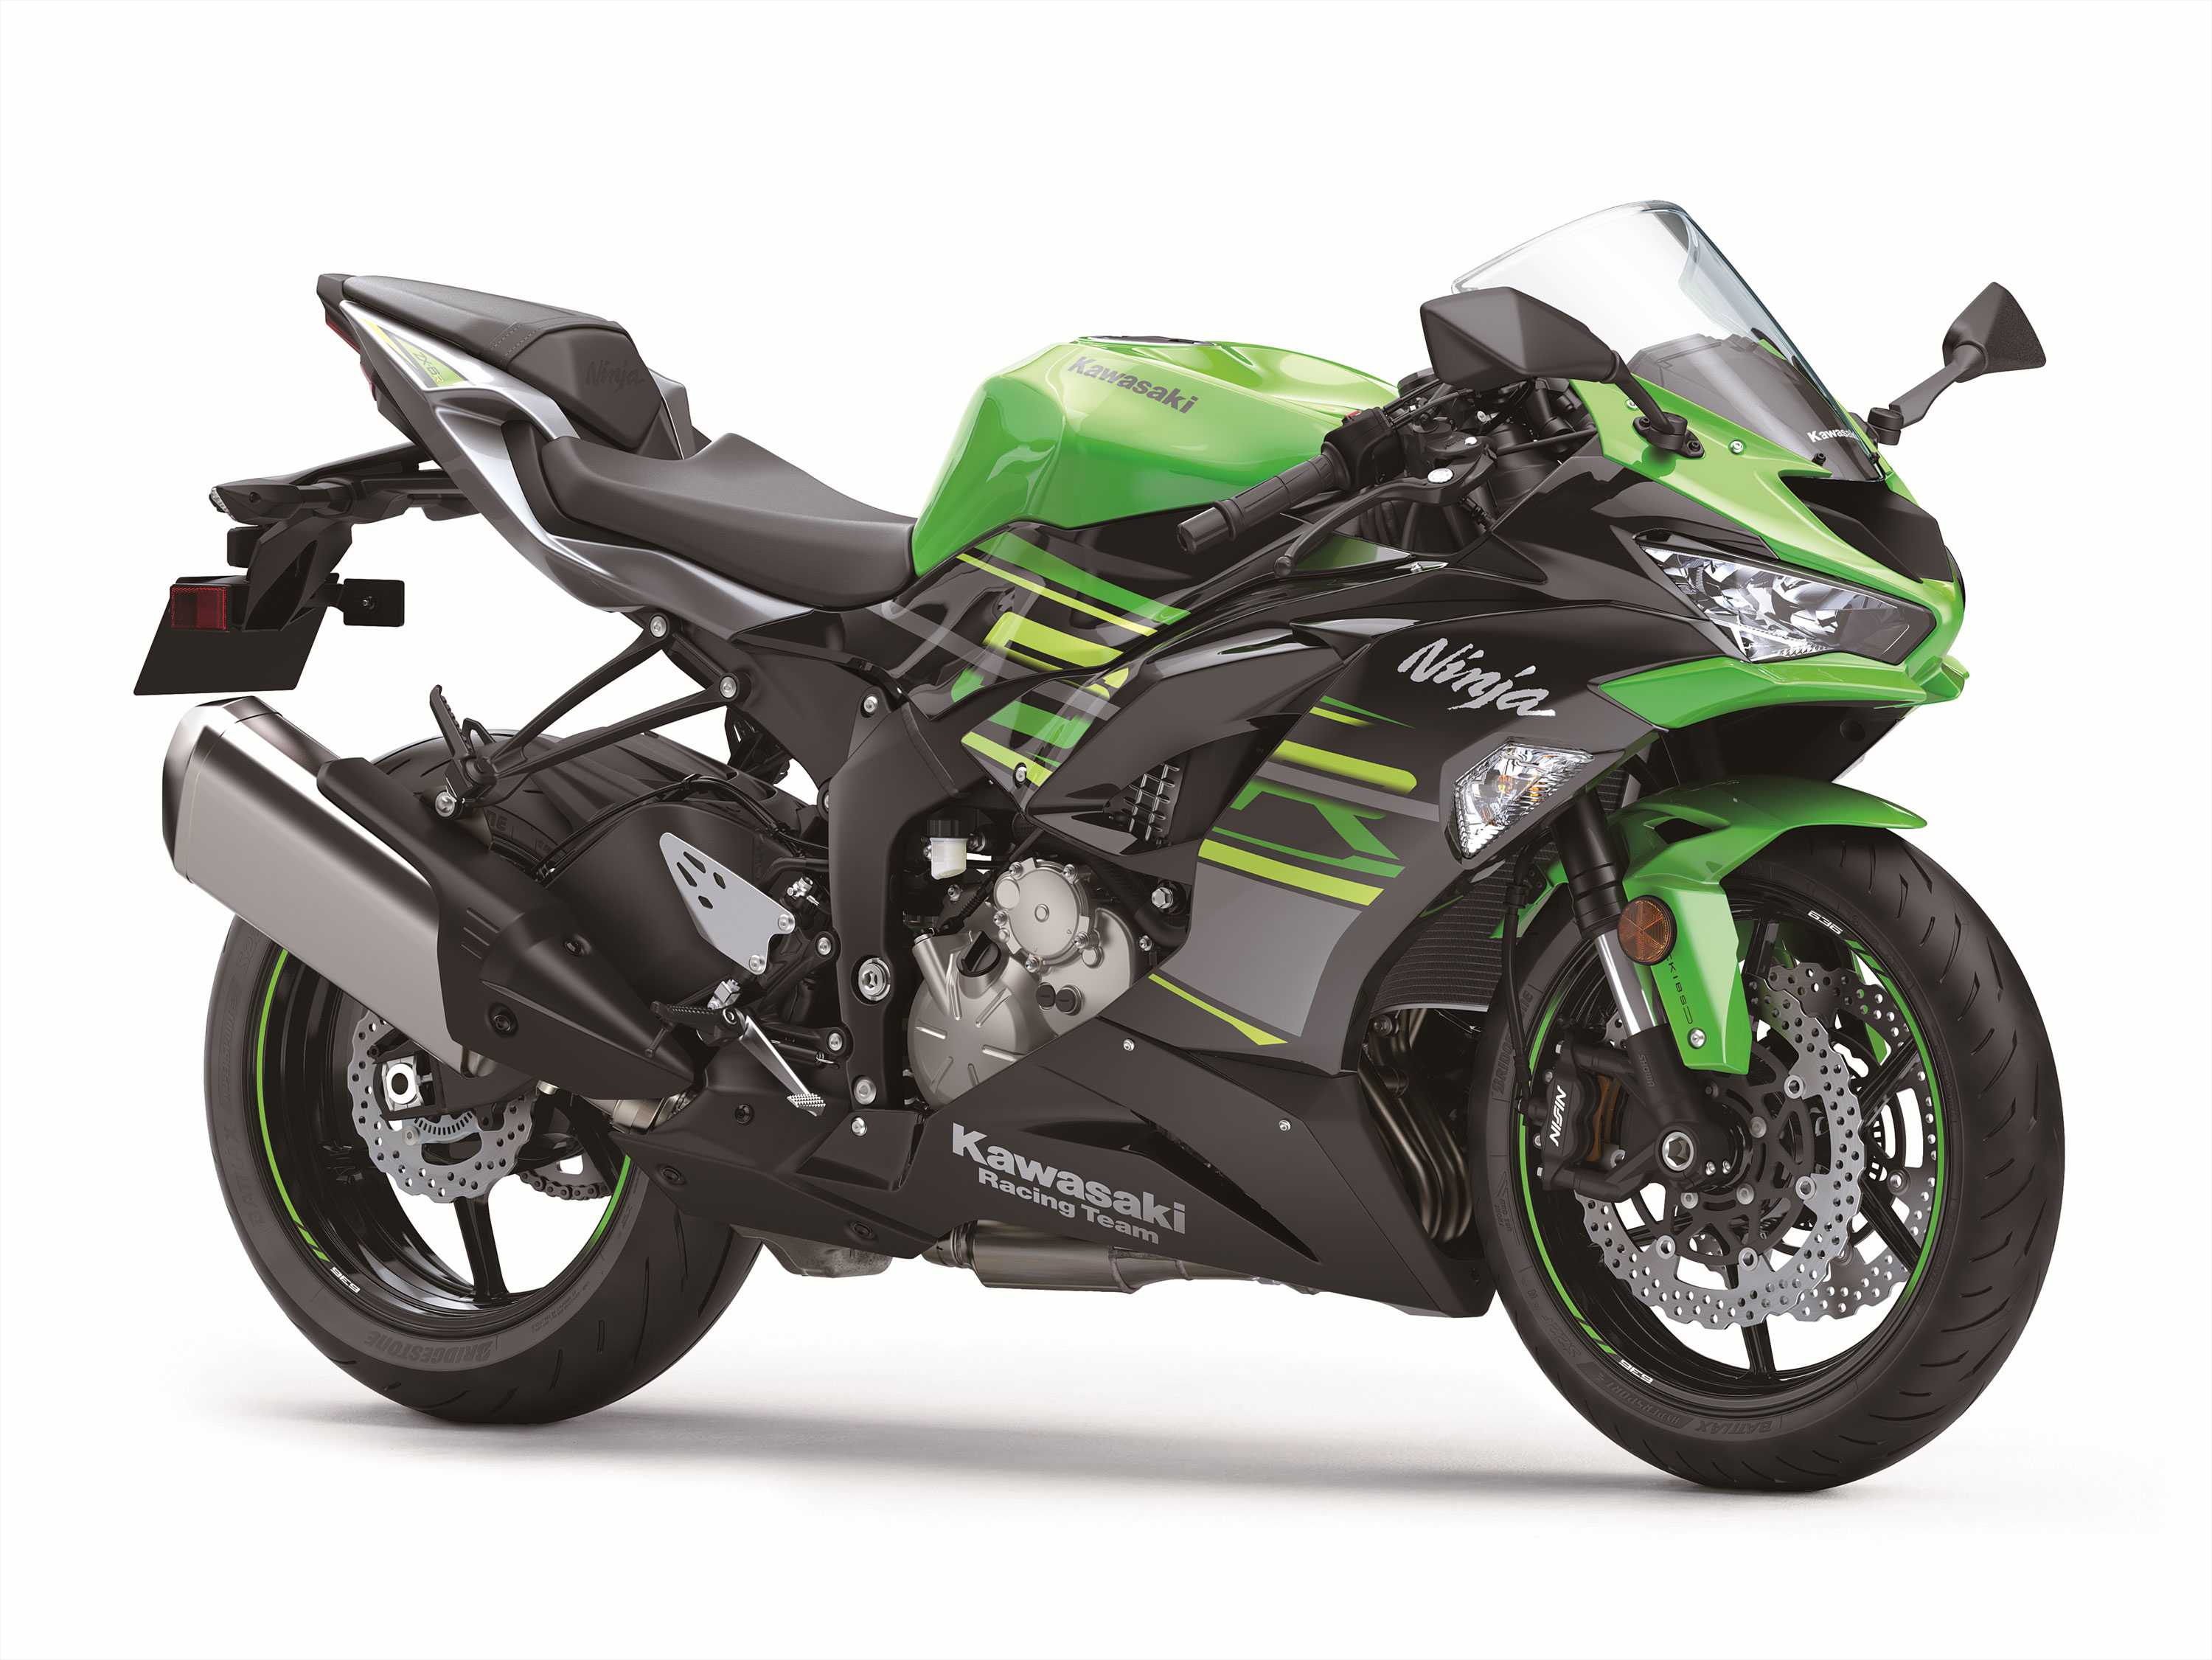 afbalanceret Tablet Bliv klar A $9,999 Supersport 600! Kawasaki Introduces New 2019 ZX-6R With Host Of  New Features And Lower Price! - Roadracing World Magazine | Motorcycle  Riding, Racing & Tech News